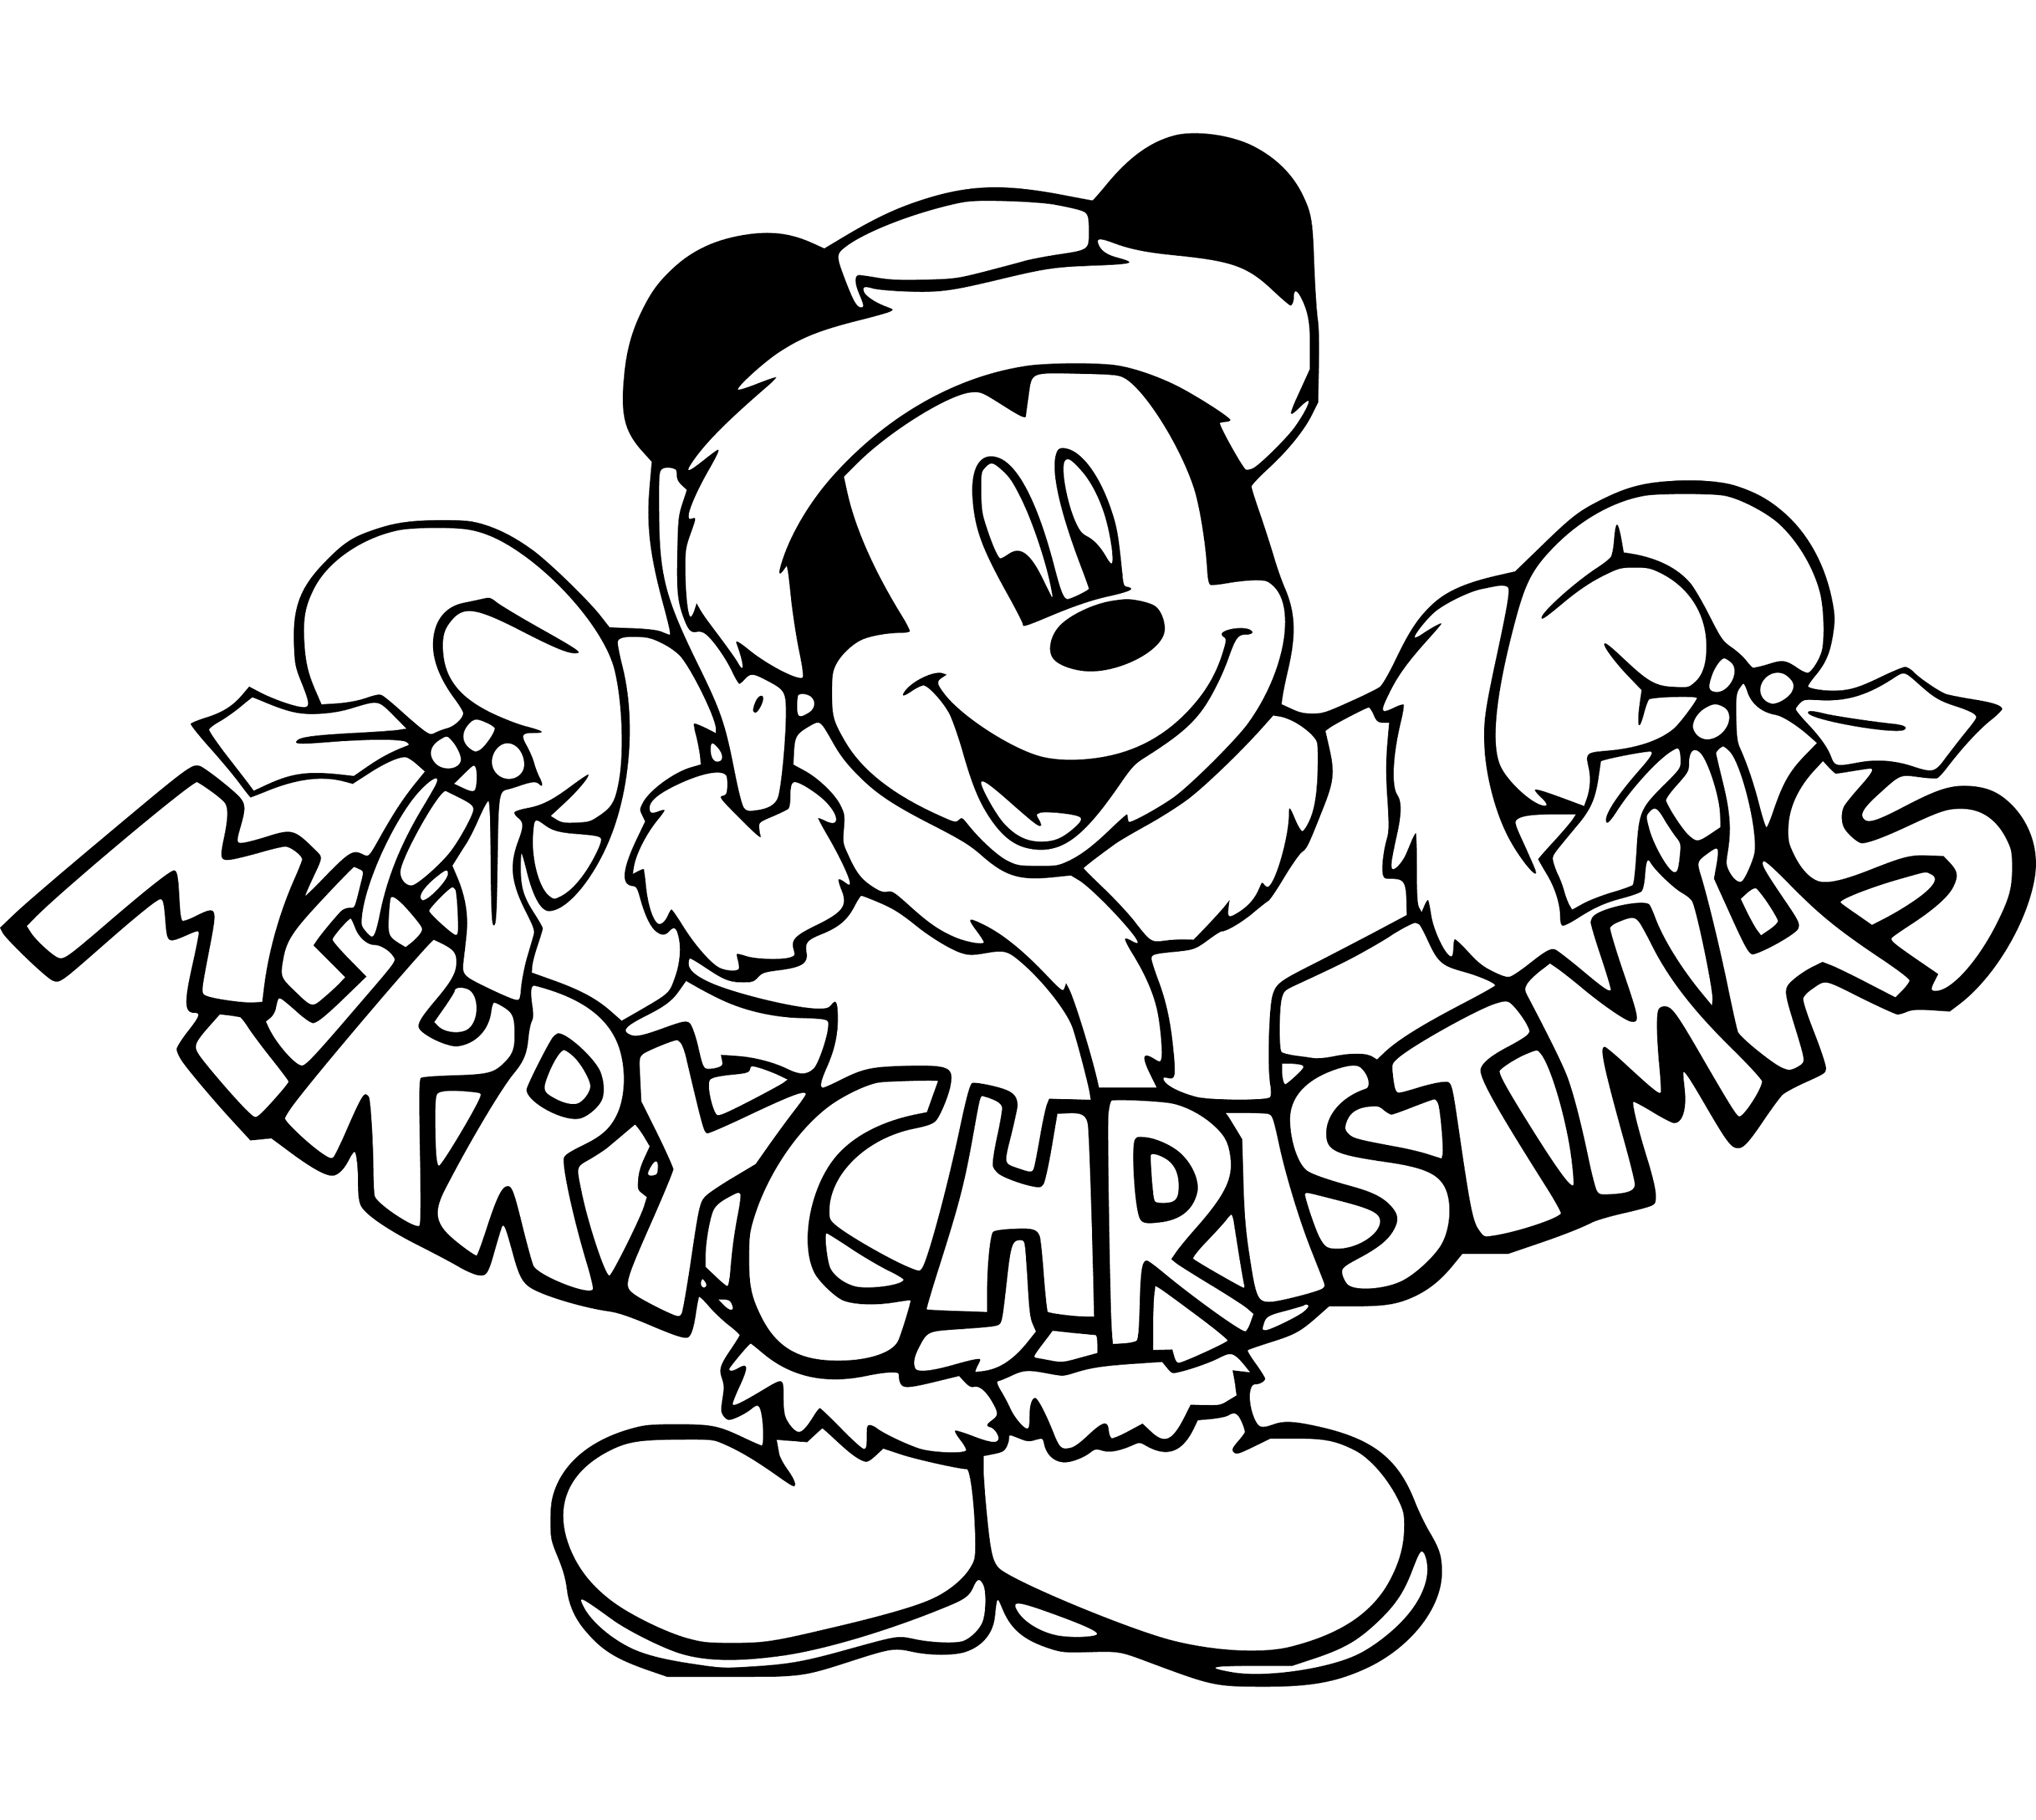 Printable Mickey Mouse Merry Christmas Coloring Page for kids.